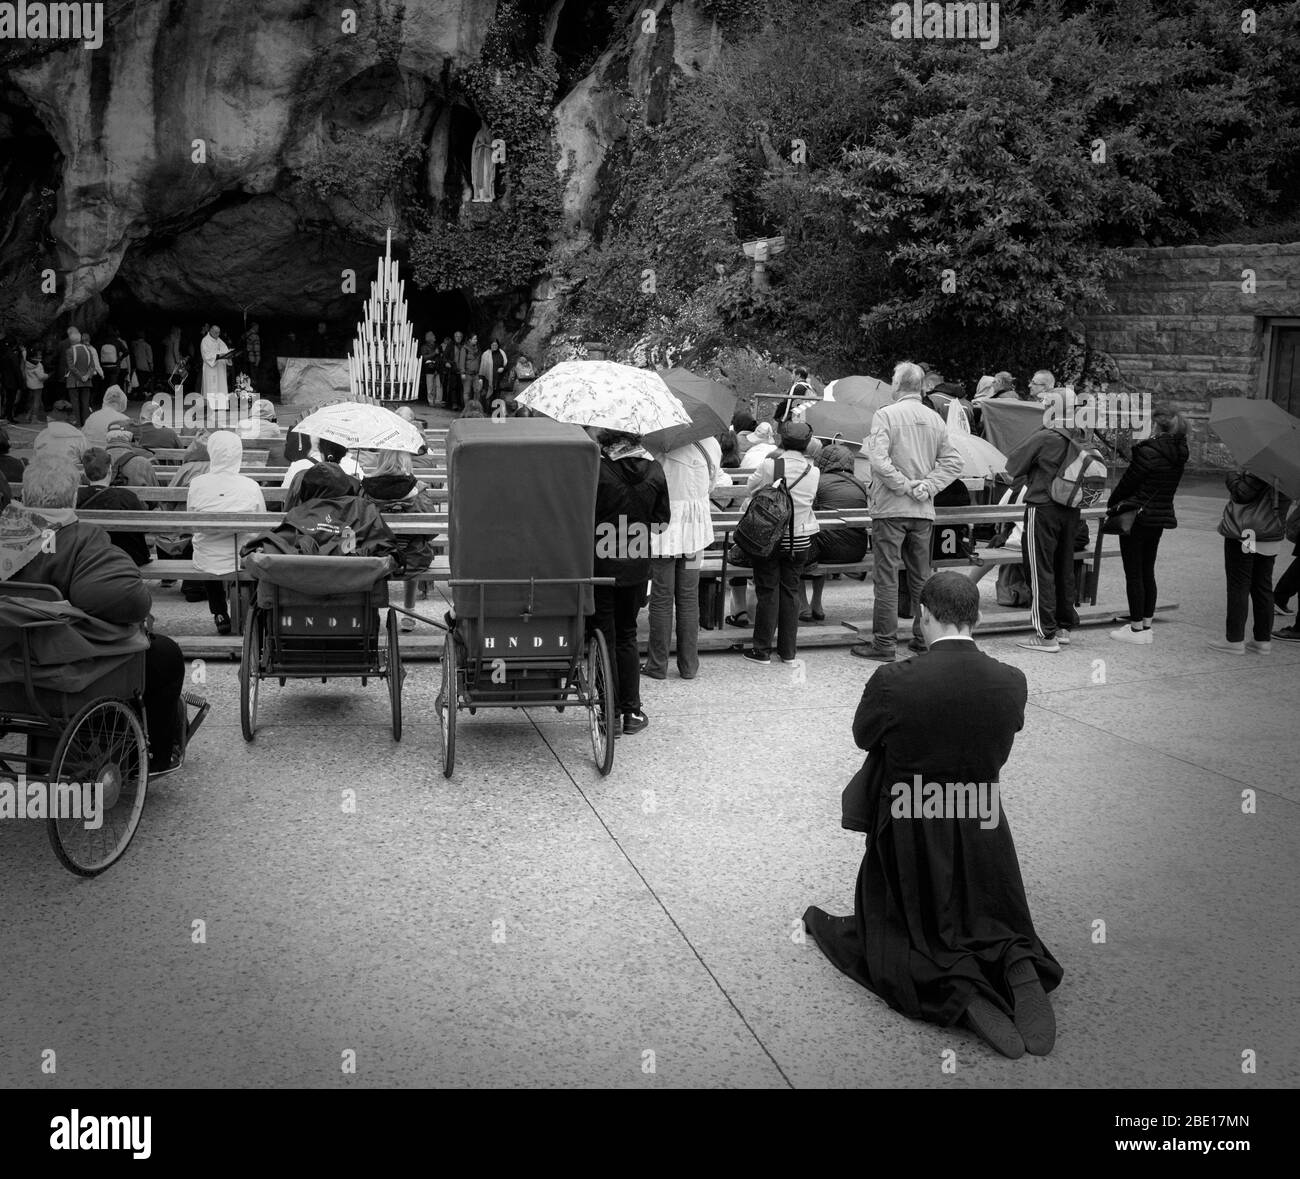 A priest kneels to pray.  In front of him people in wheelchairs.  In the background another priest recites prayers at the entrance to the Massabielle Stock Photo